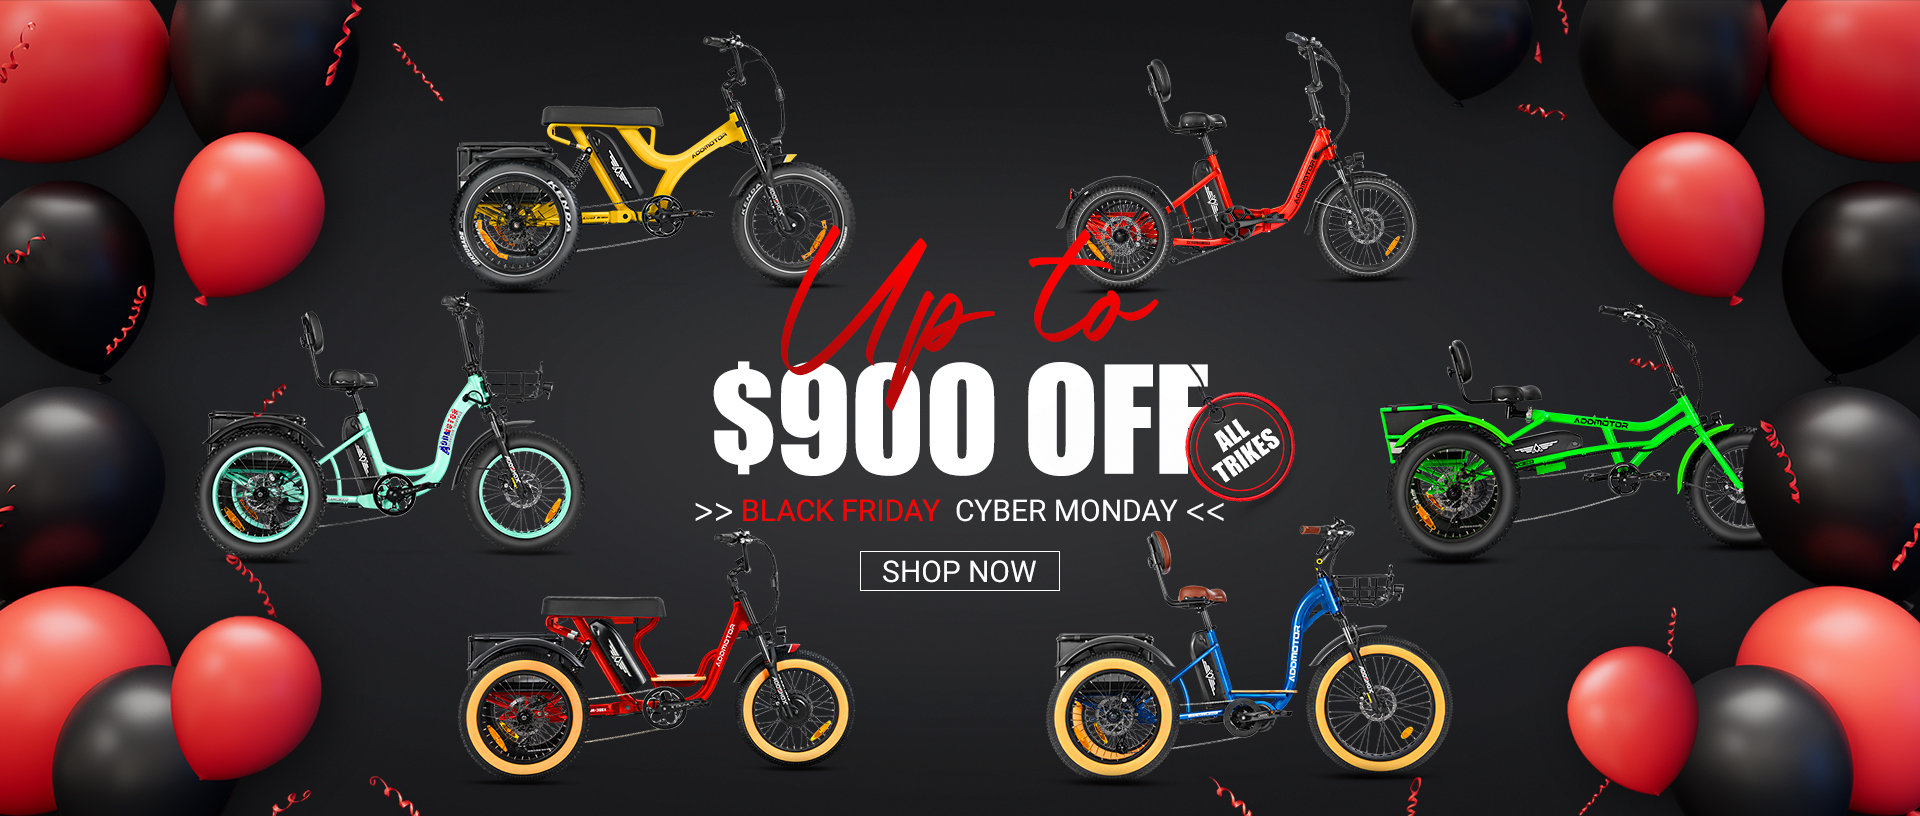 black friday sale up to $900 off all etrikes